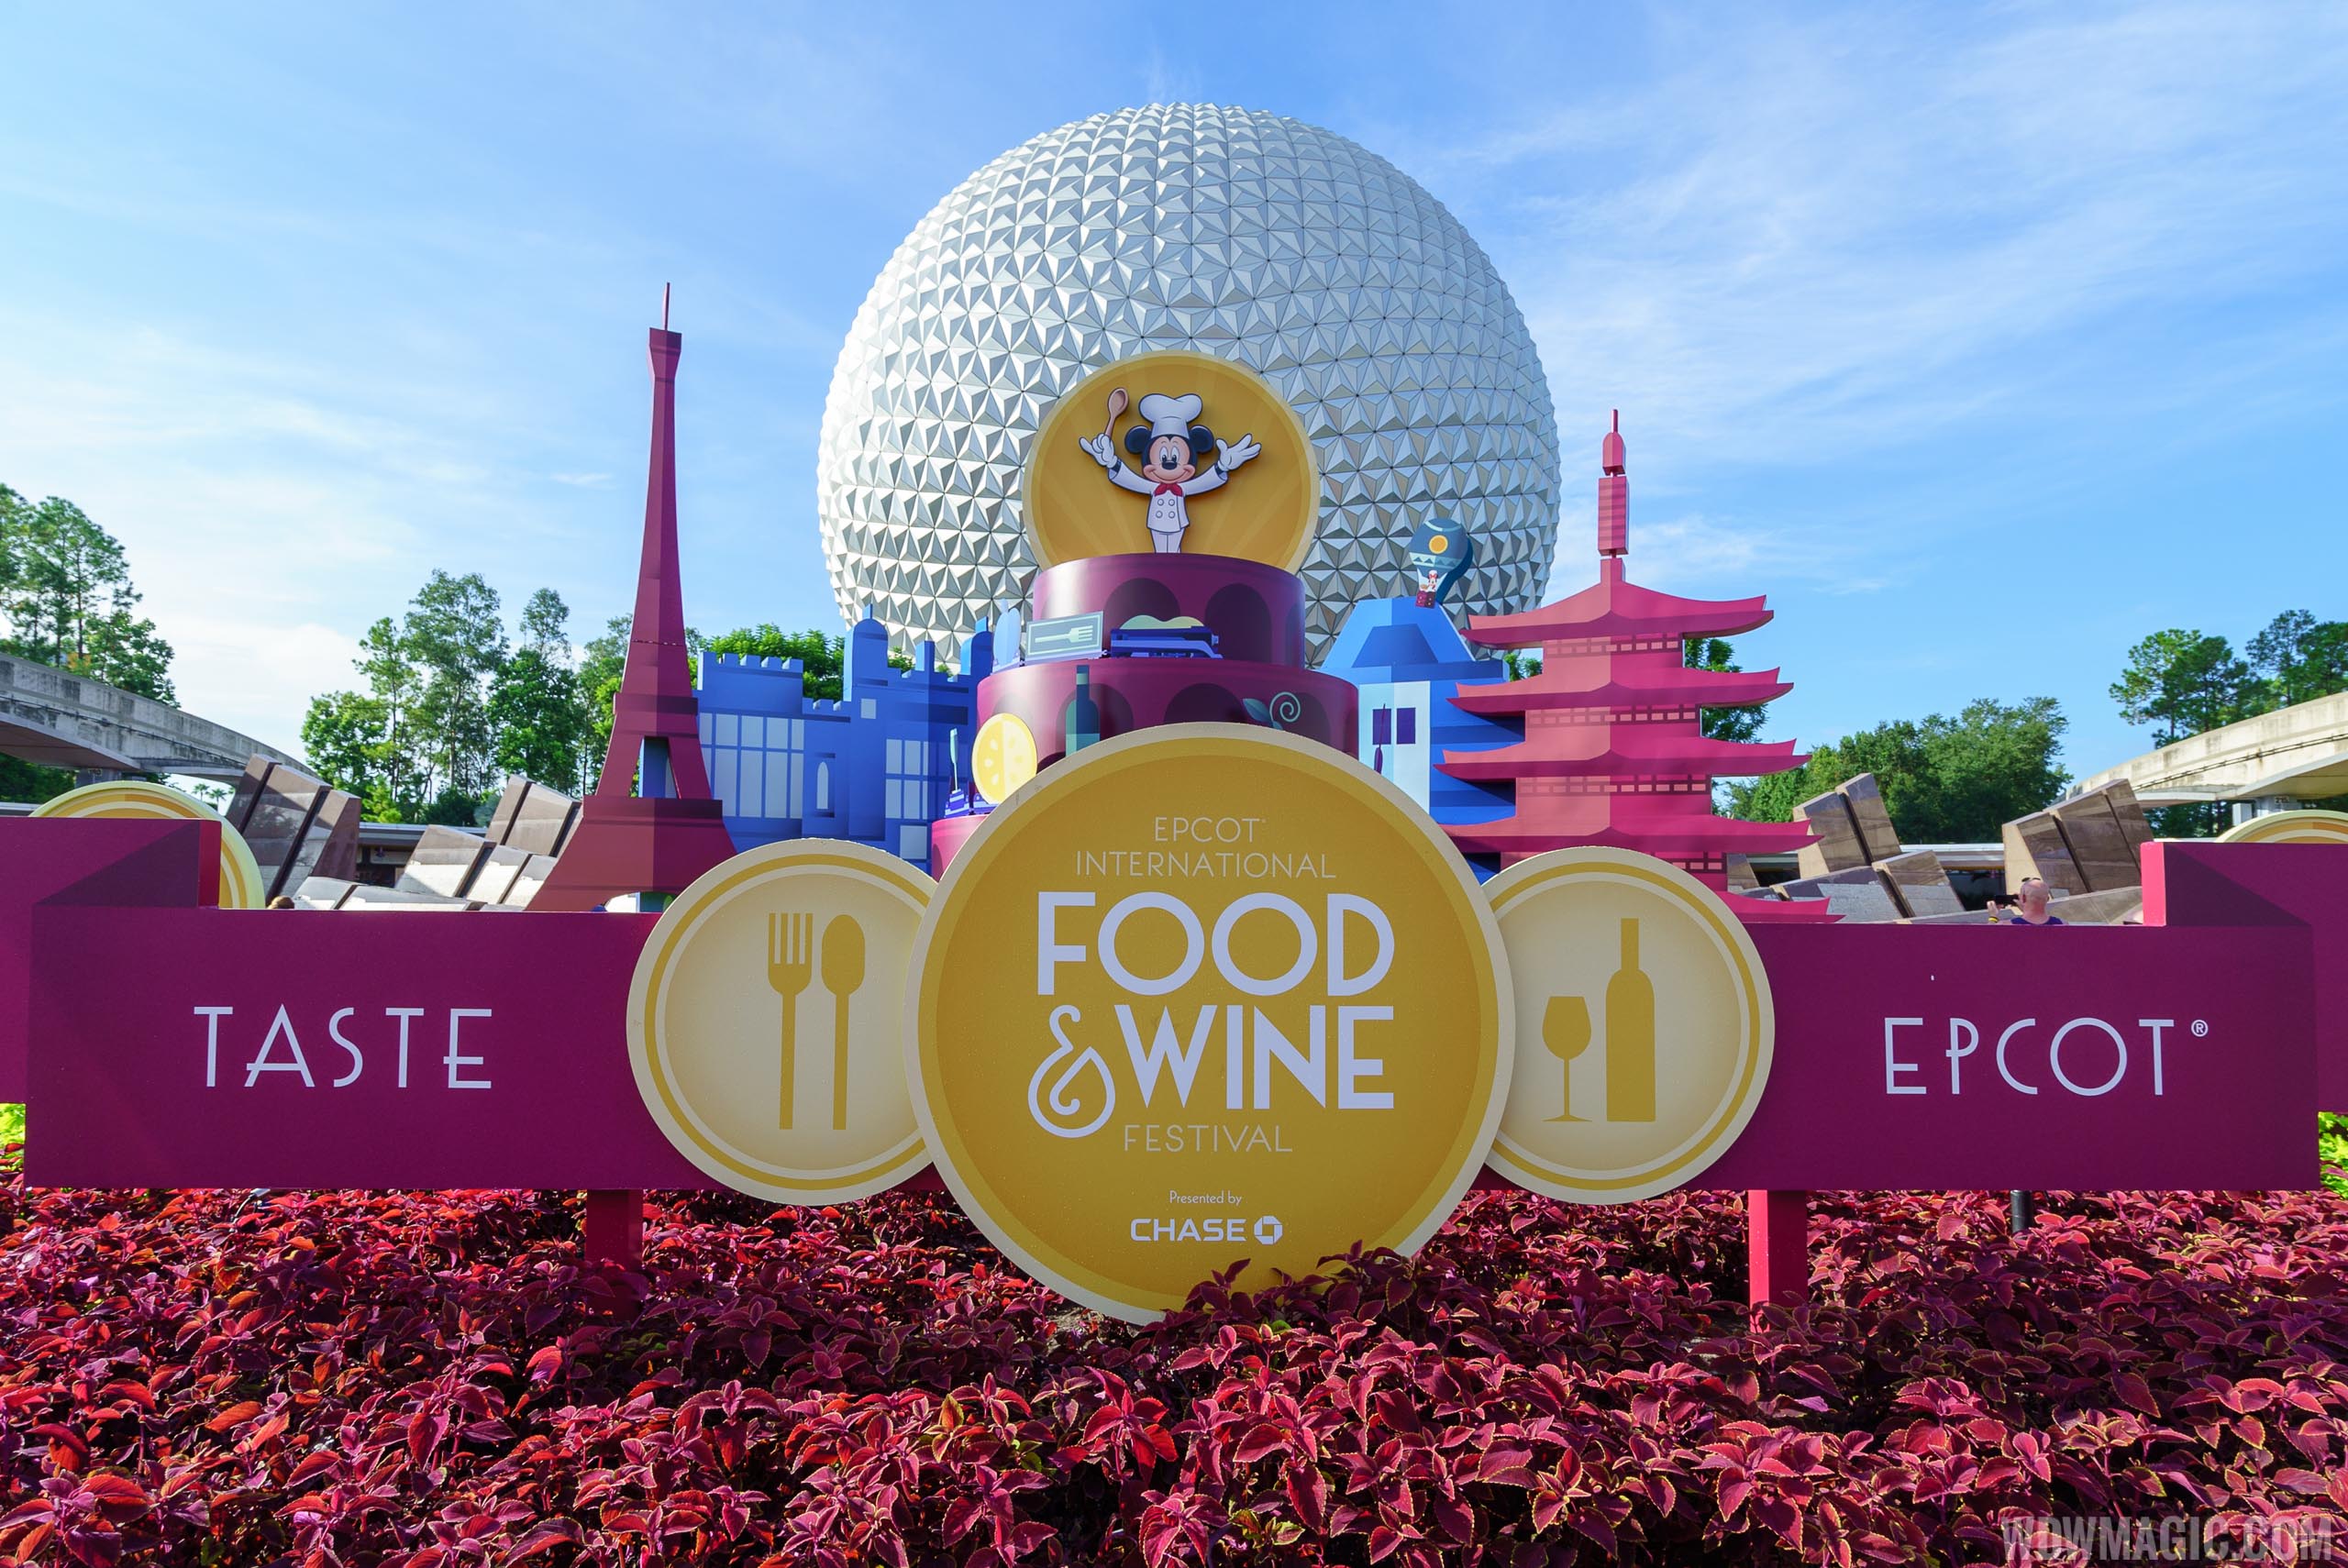 A First-Timer's Guide to the Epcot International Food and Wine Festival